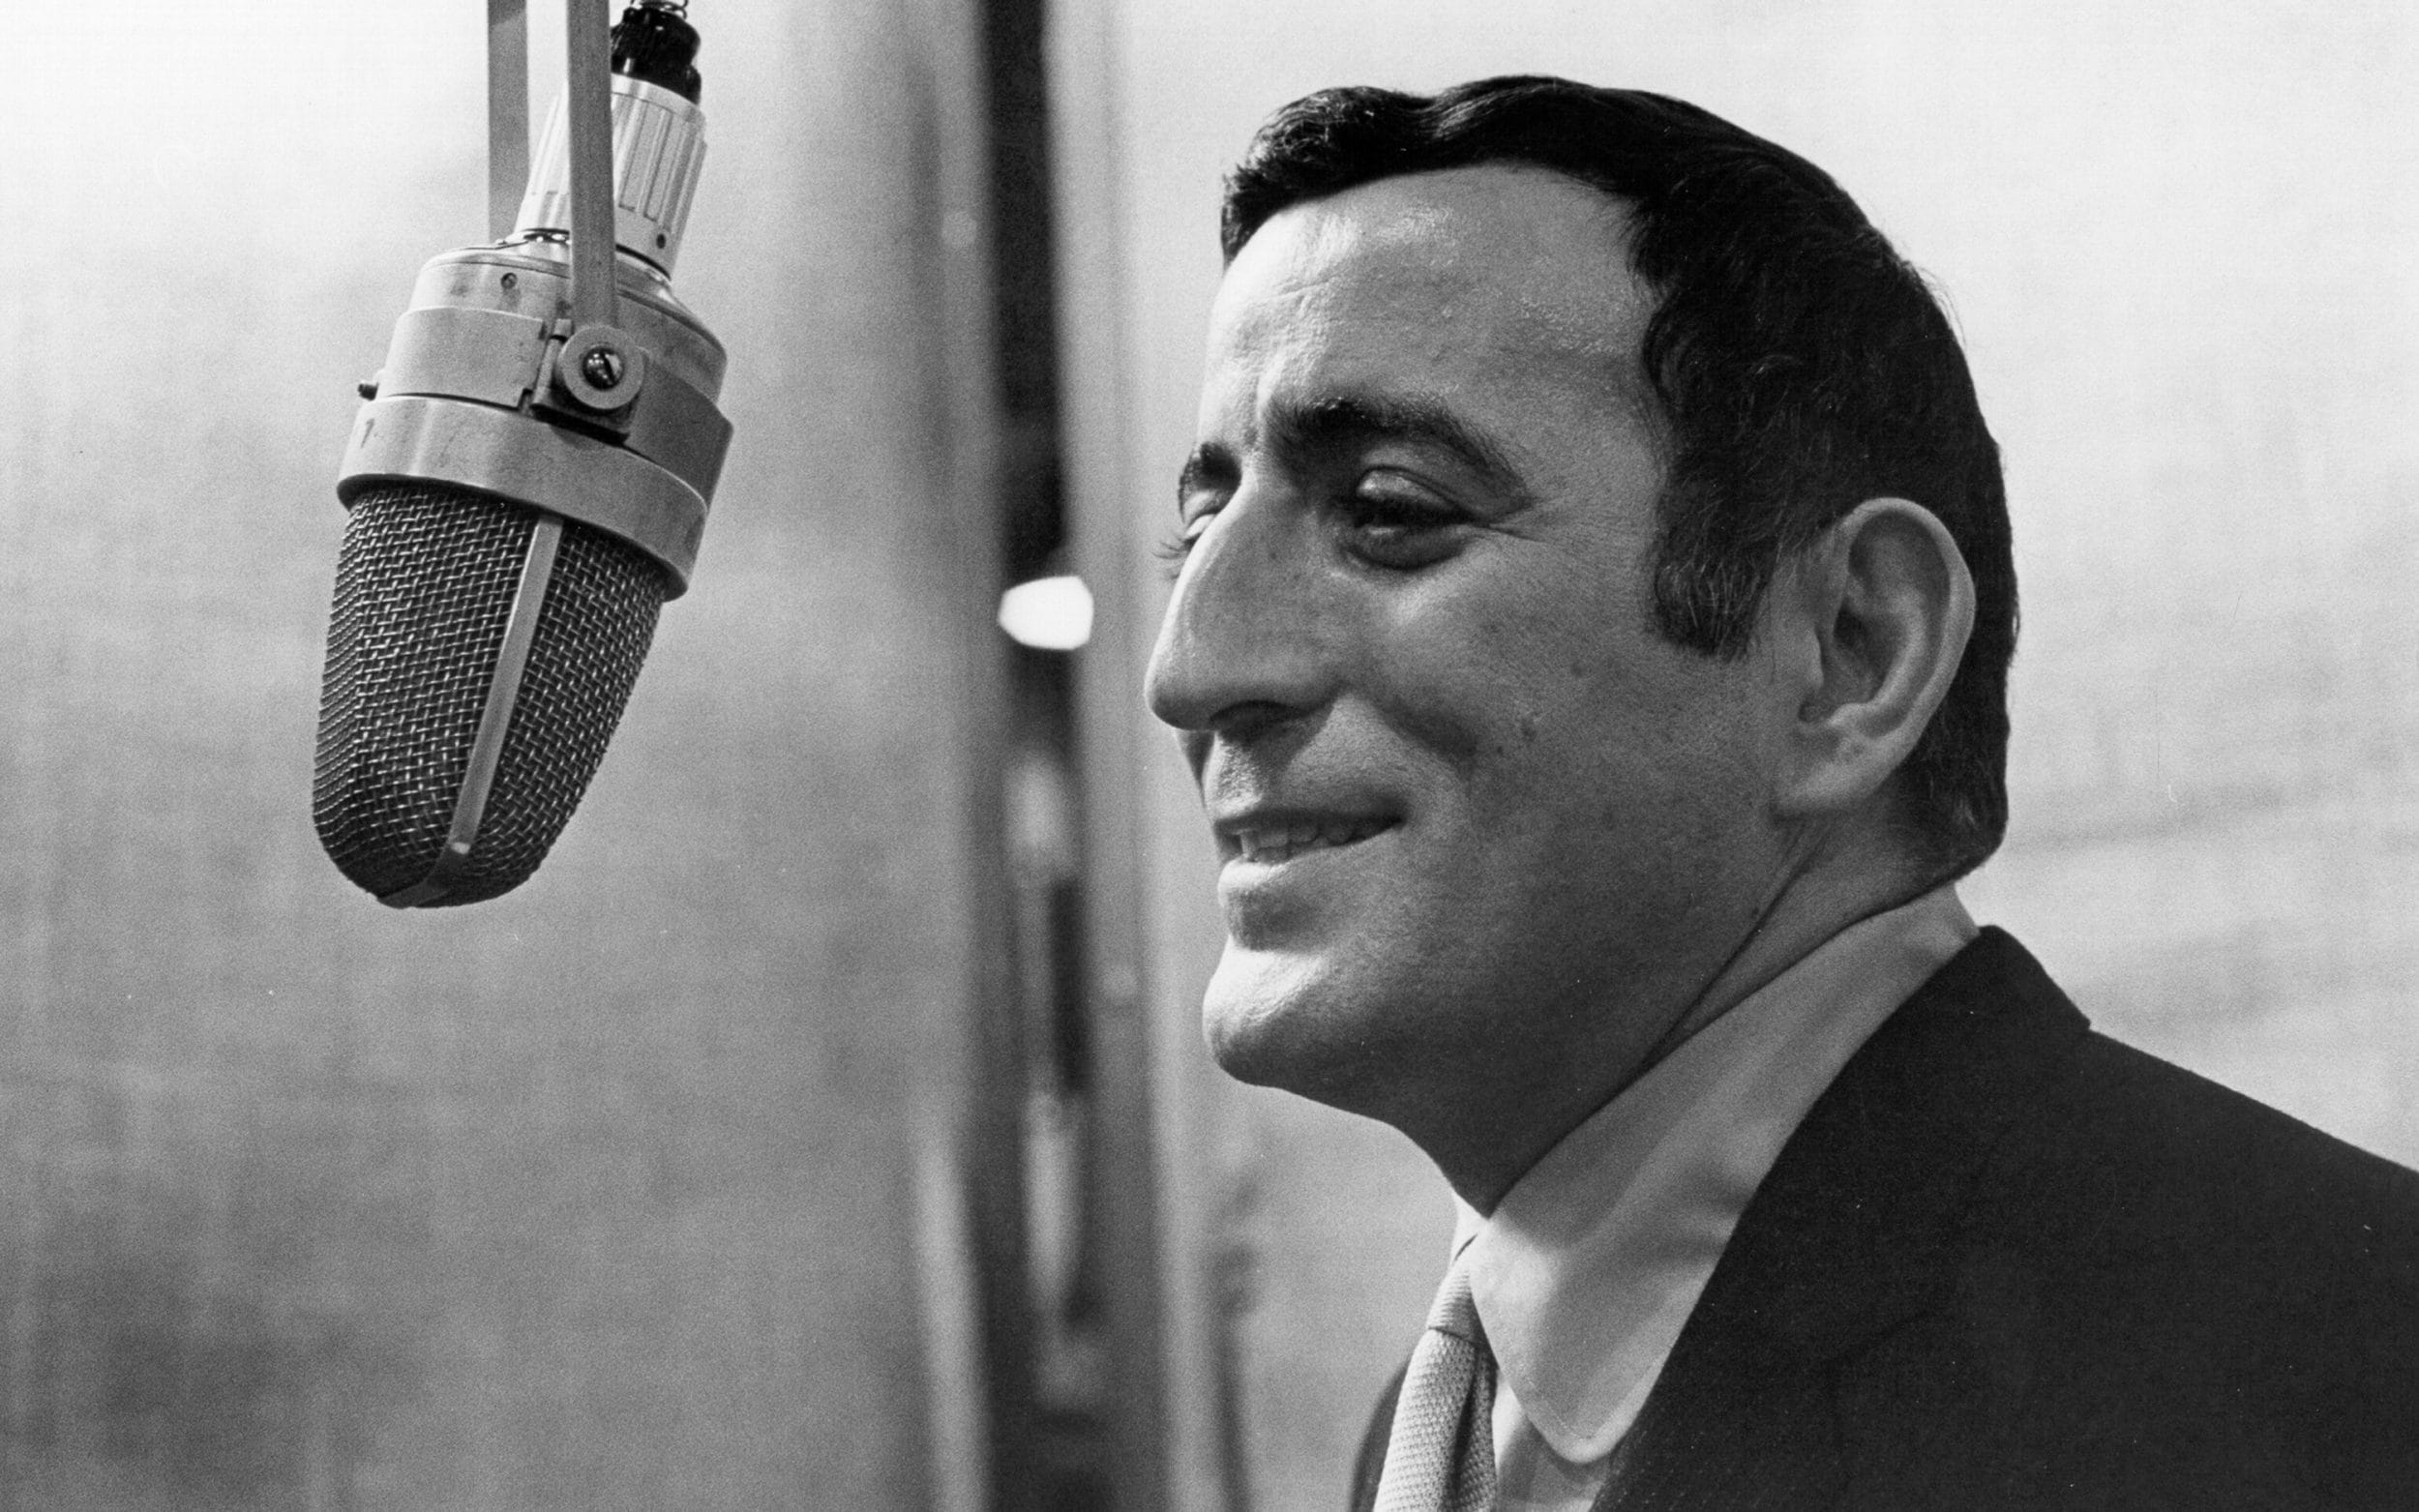 Tony Bennett obituary: suave singer of jazz standards whose career spanned 70 years